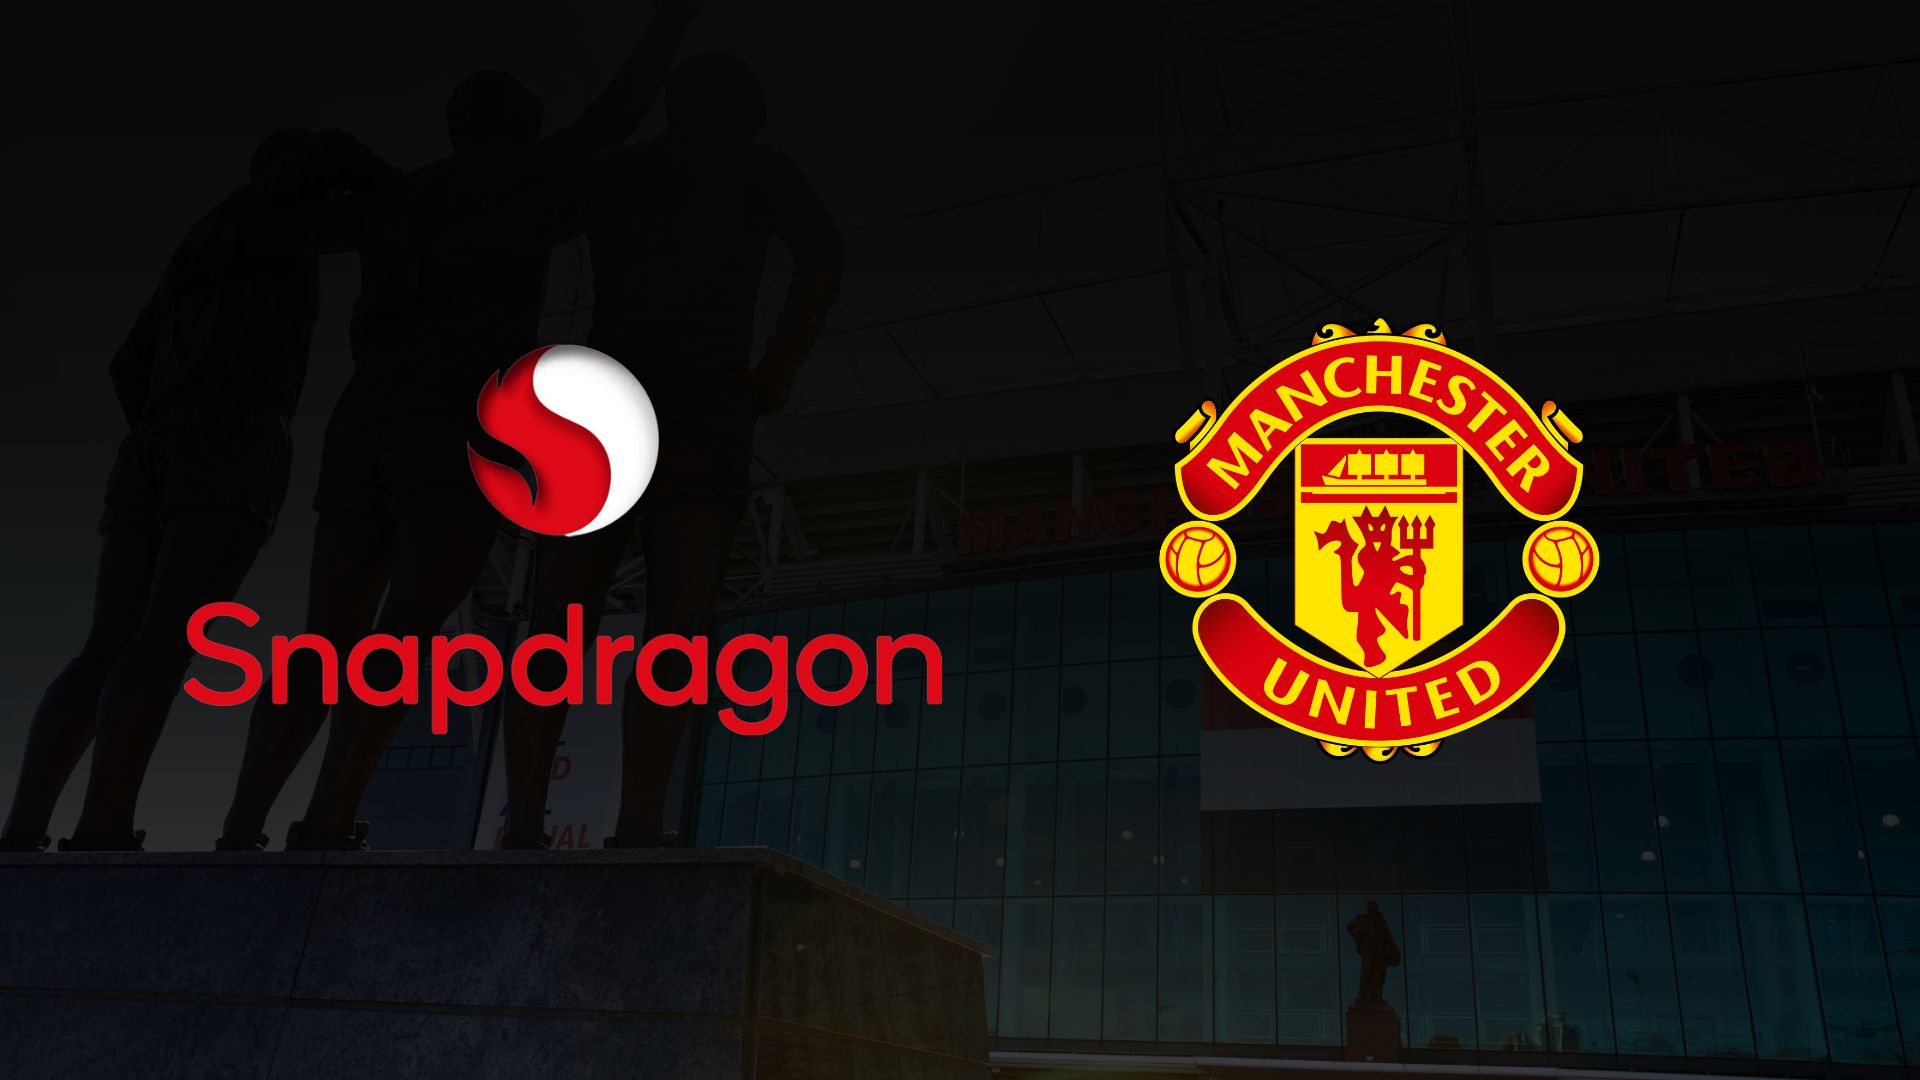 Qualcomm's Bold Play: A Marketing Power Move with Manchester United Sponsorship